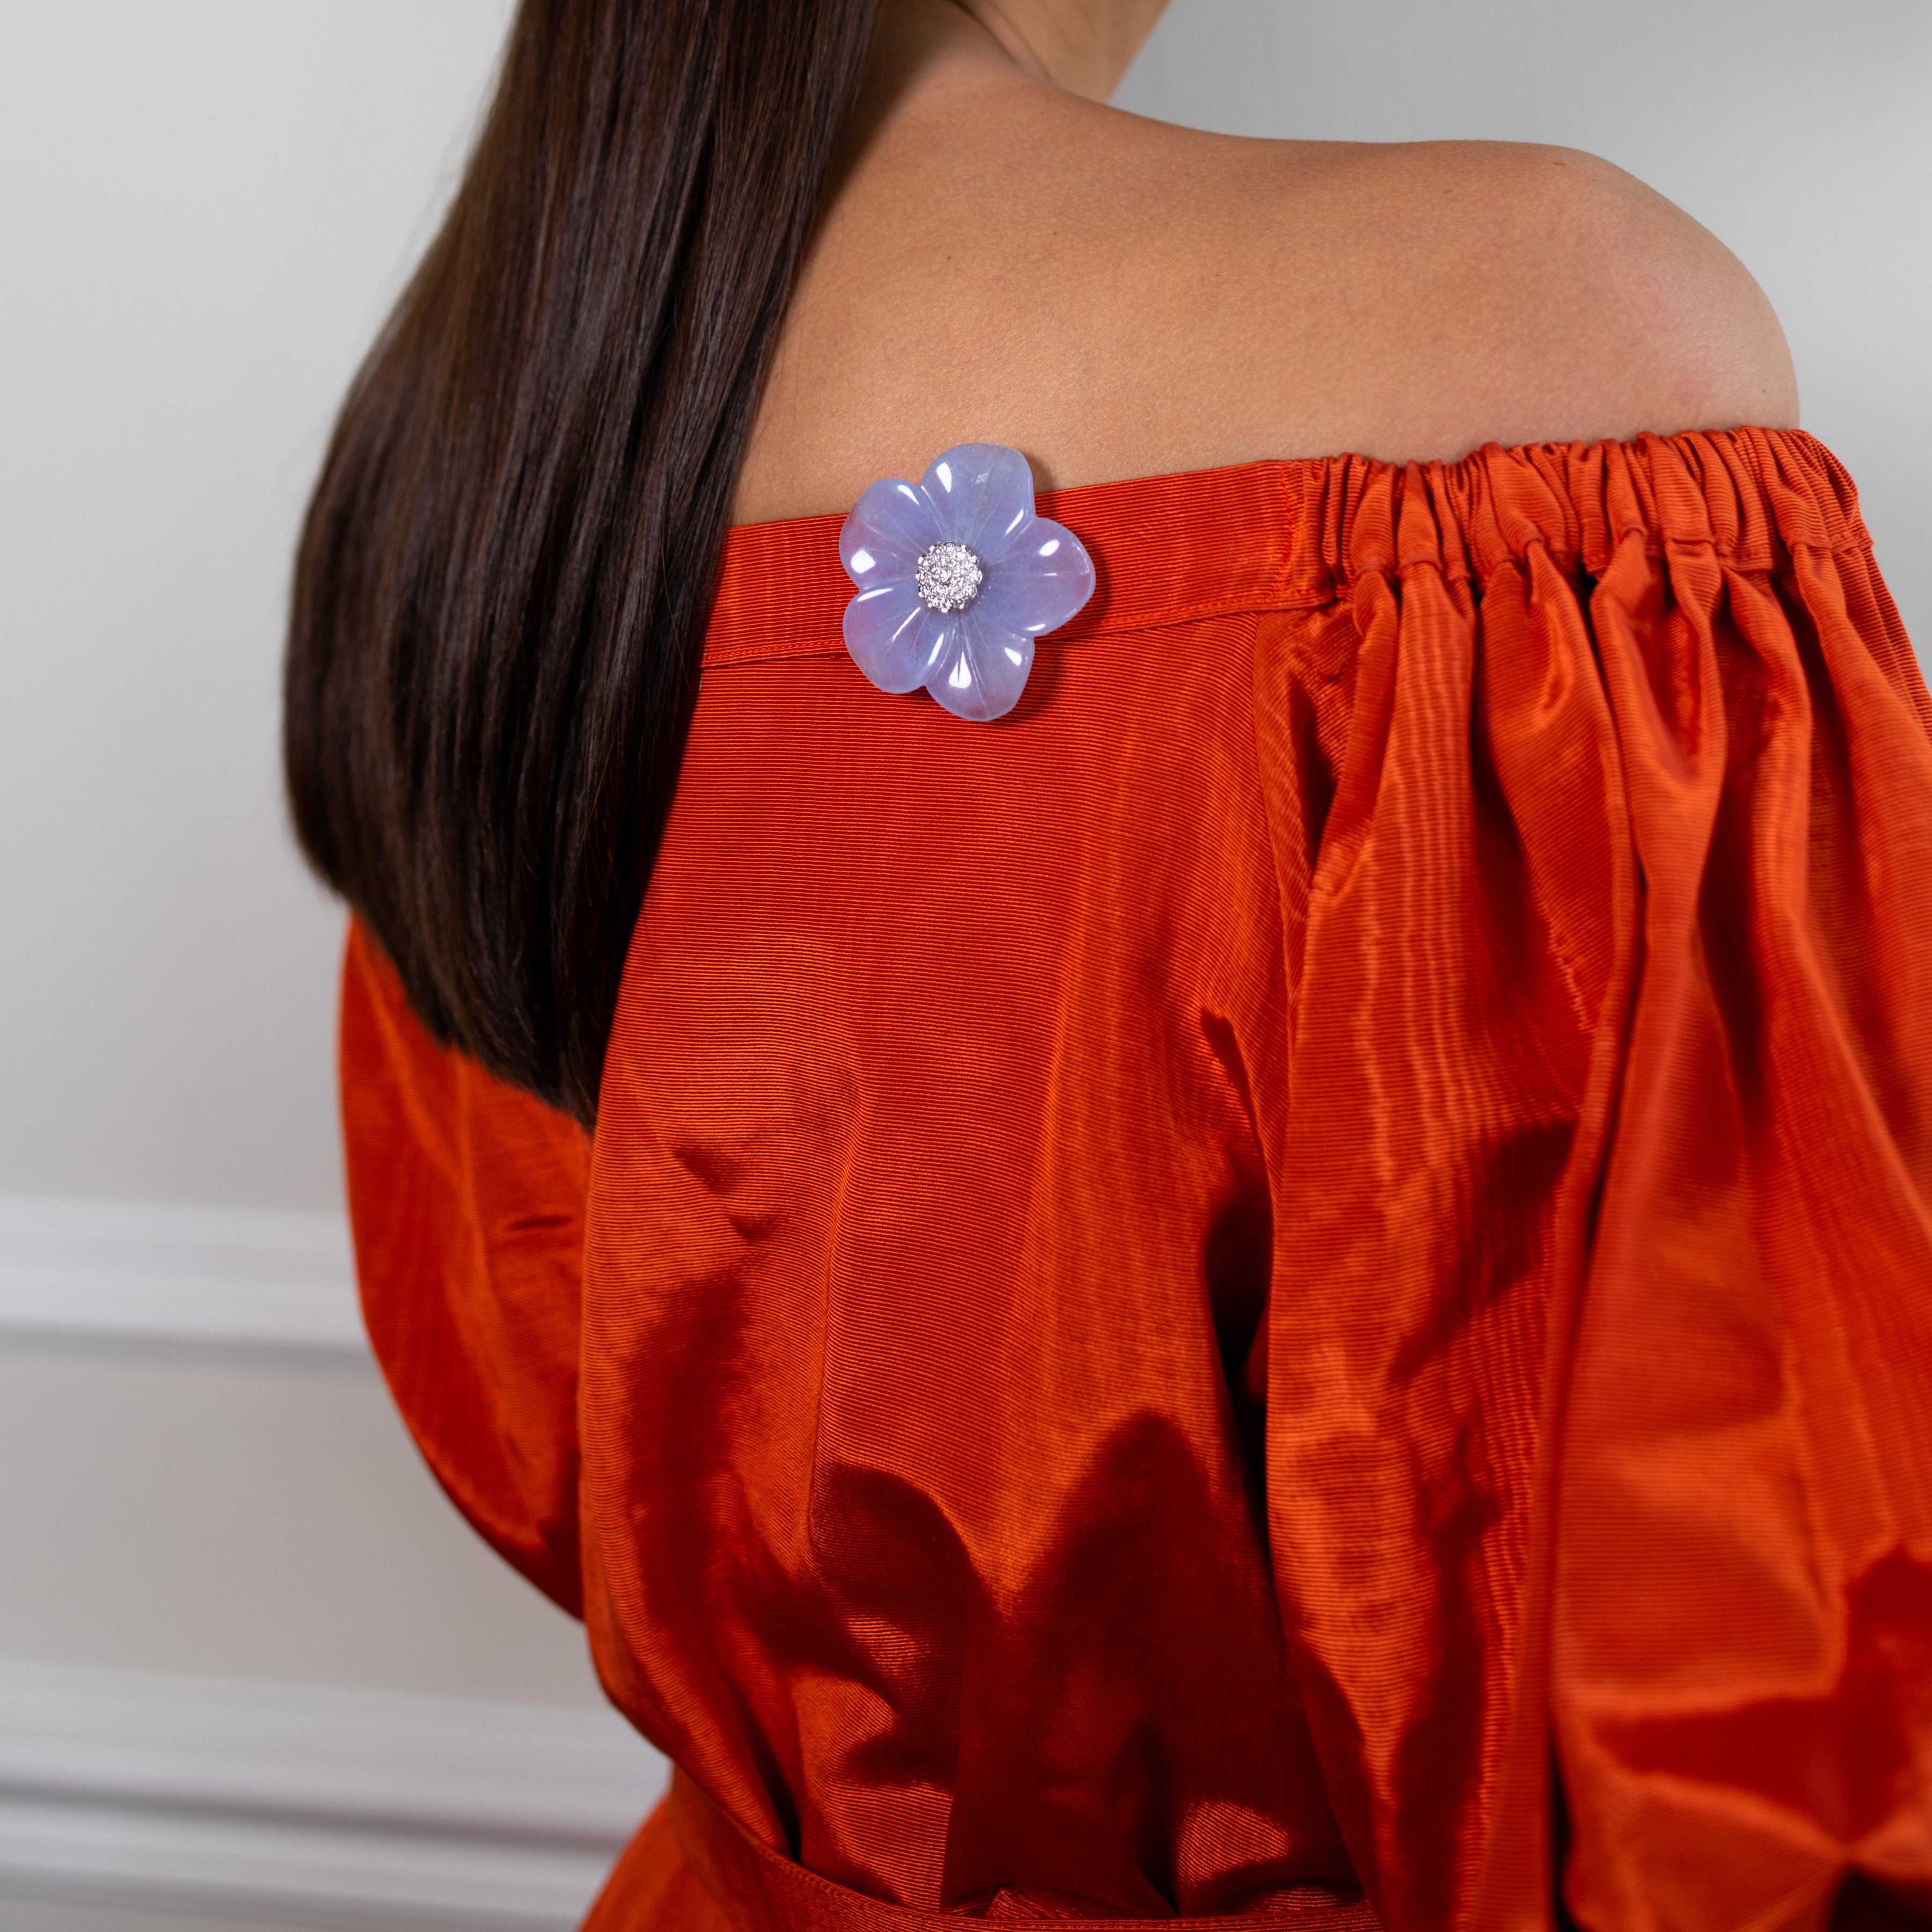 Vintage flower brooch worn on a woman’s back on a red low-cut top.